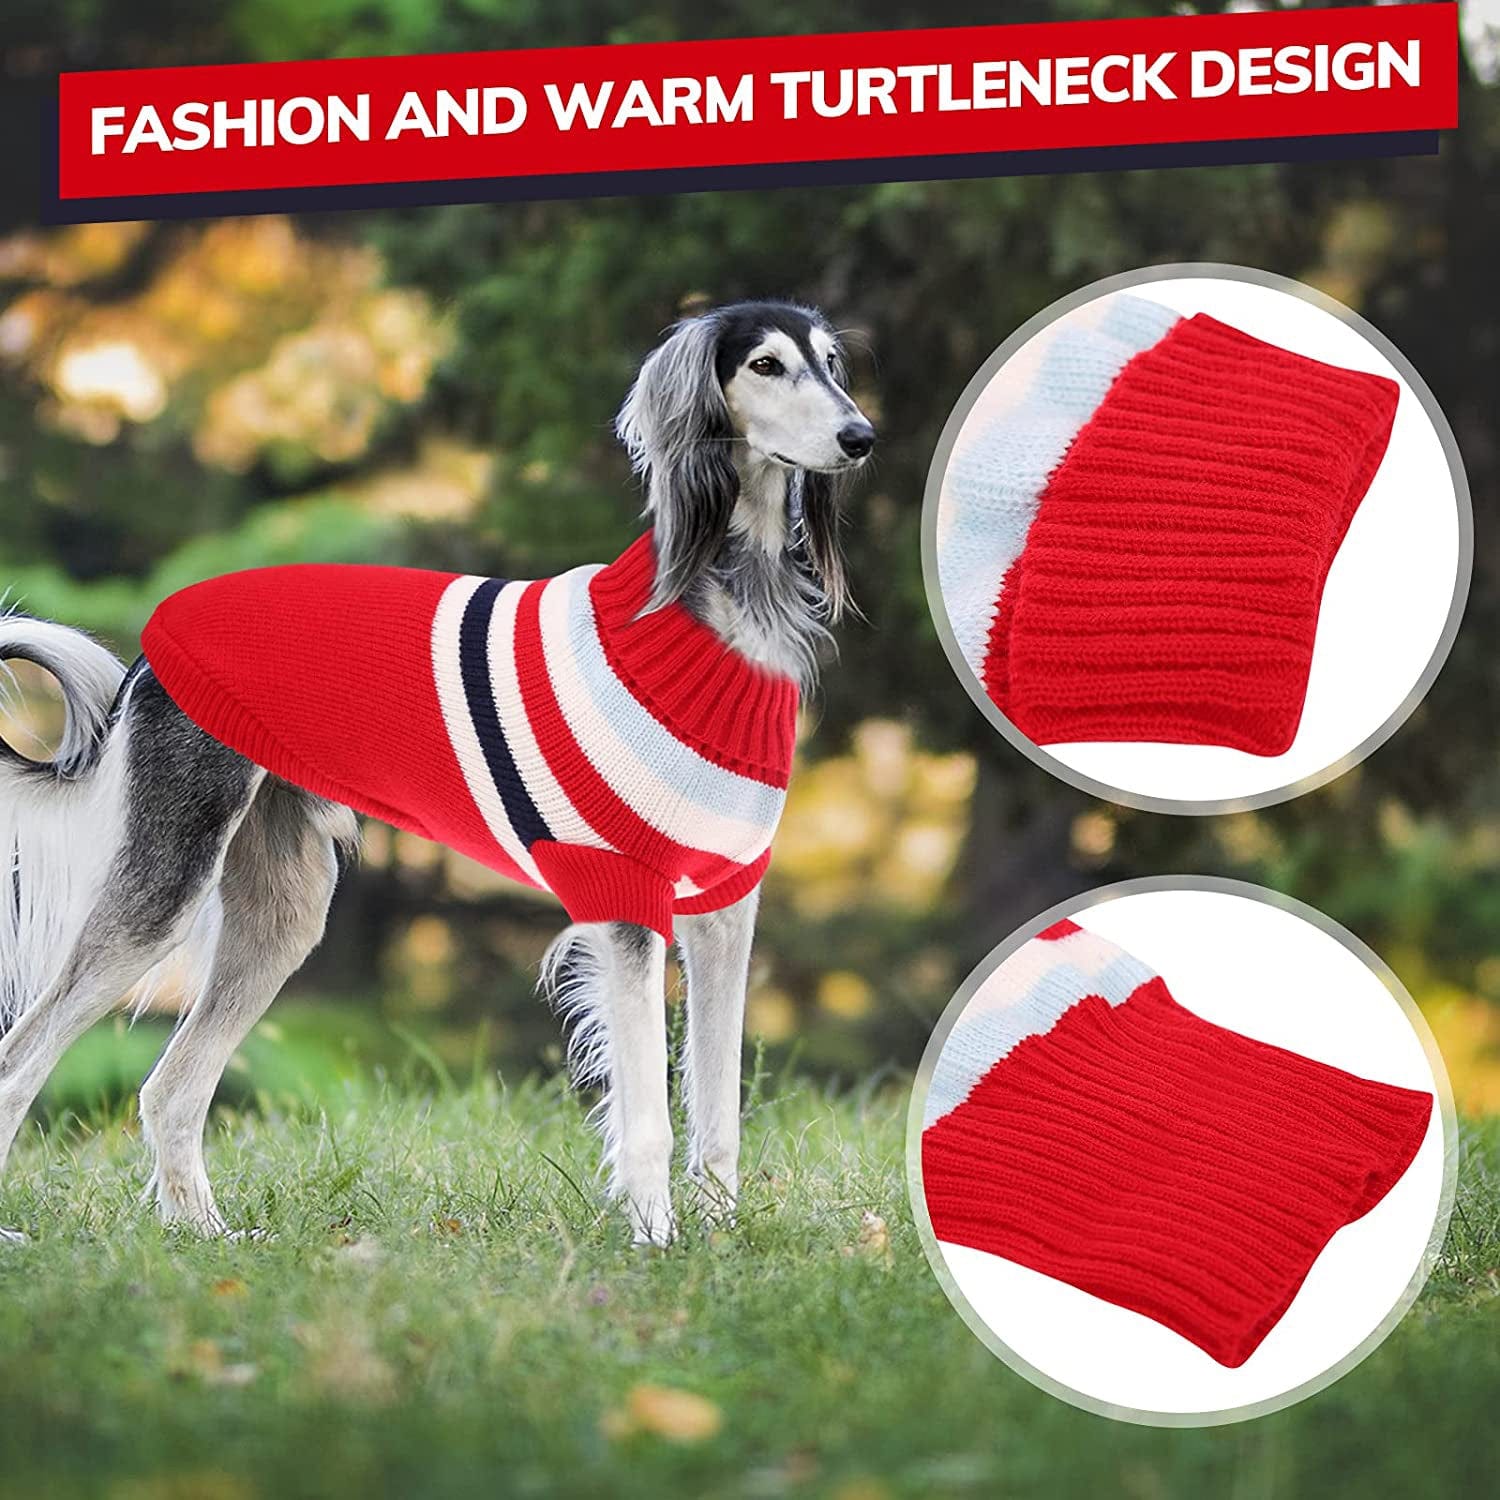 KUTKUT Dog Sweater | Warm Strip Dog Winter Knitwear Clothes with Elastic Leg Bands | Soft Acrylic Knitted Pet Pullover for Small Medium Large Doggy (Red) - kutkutstyle